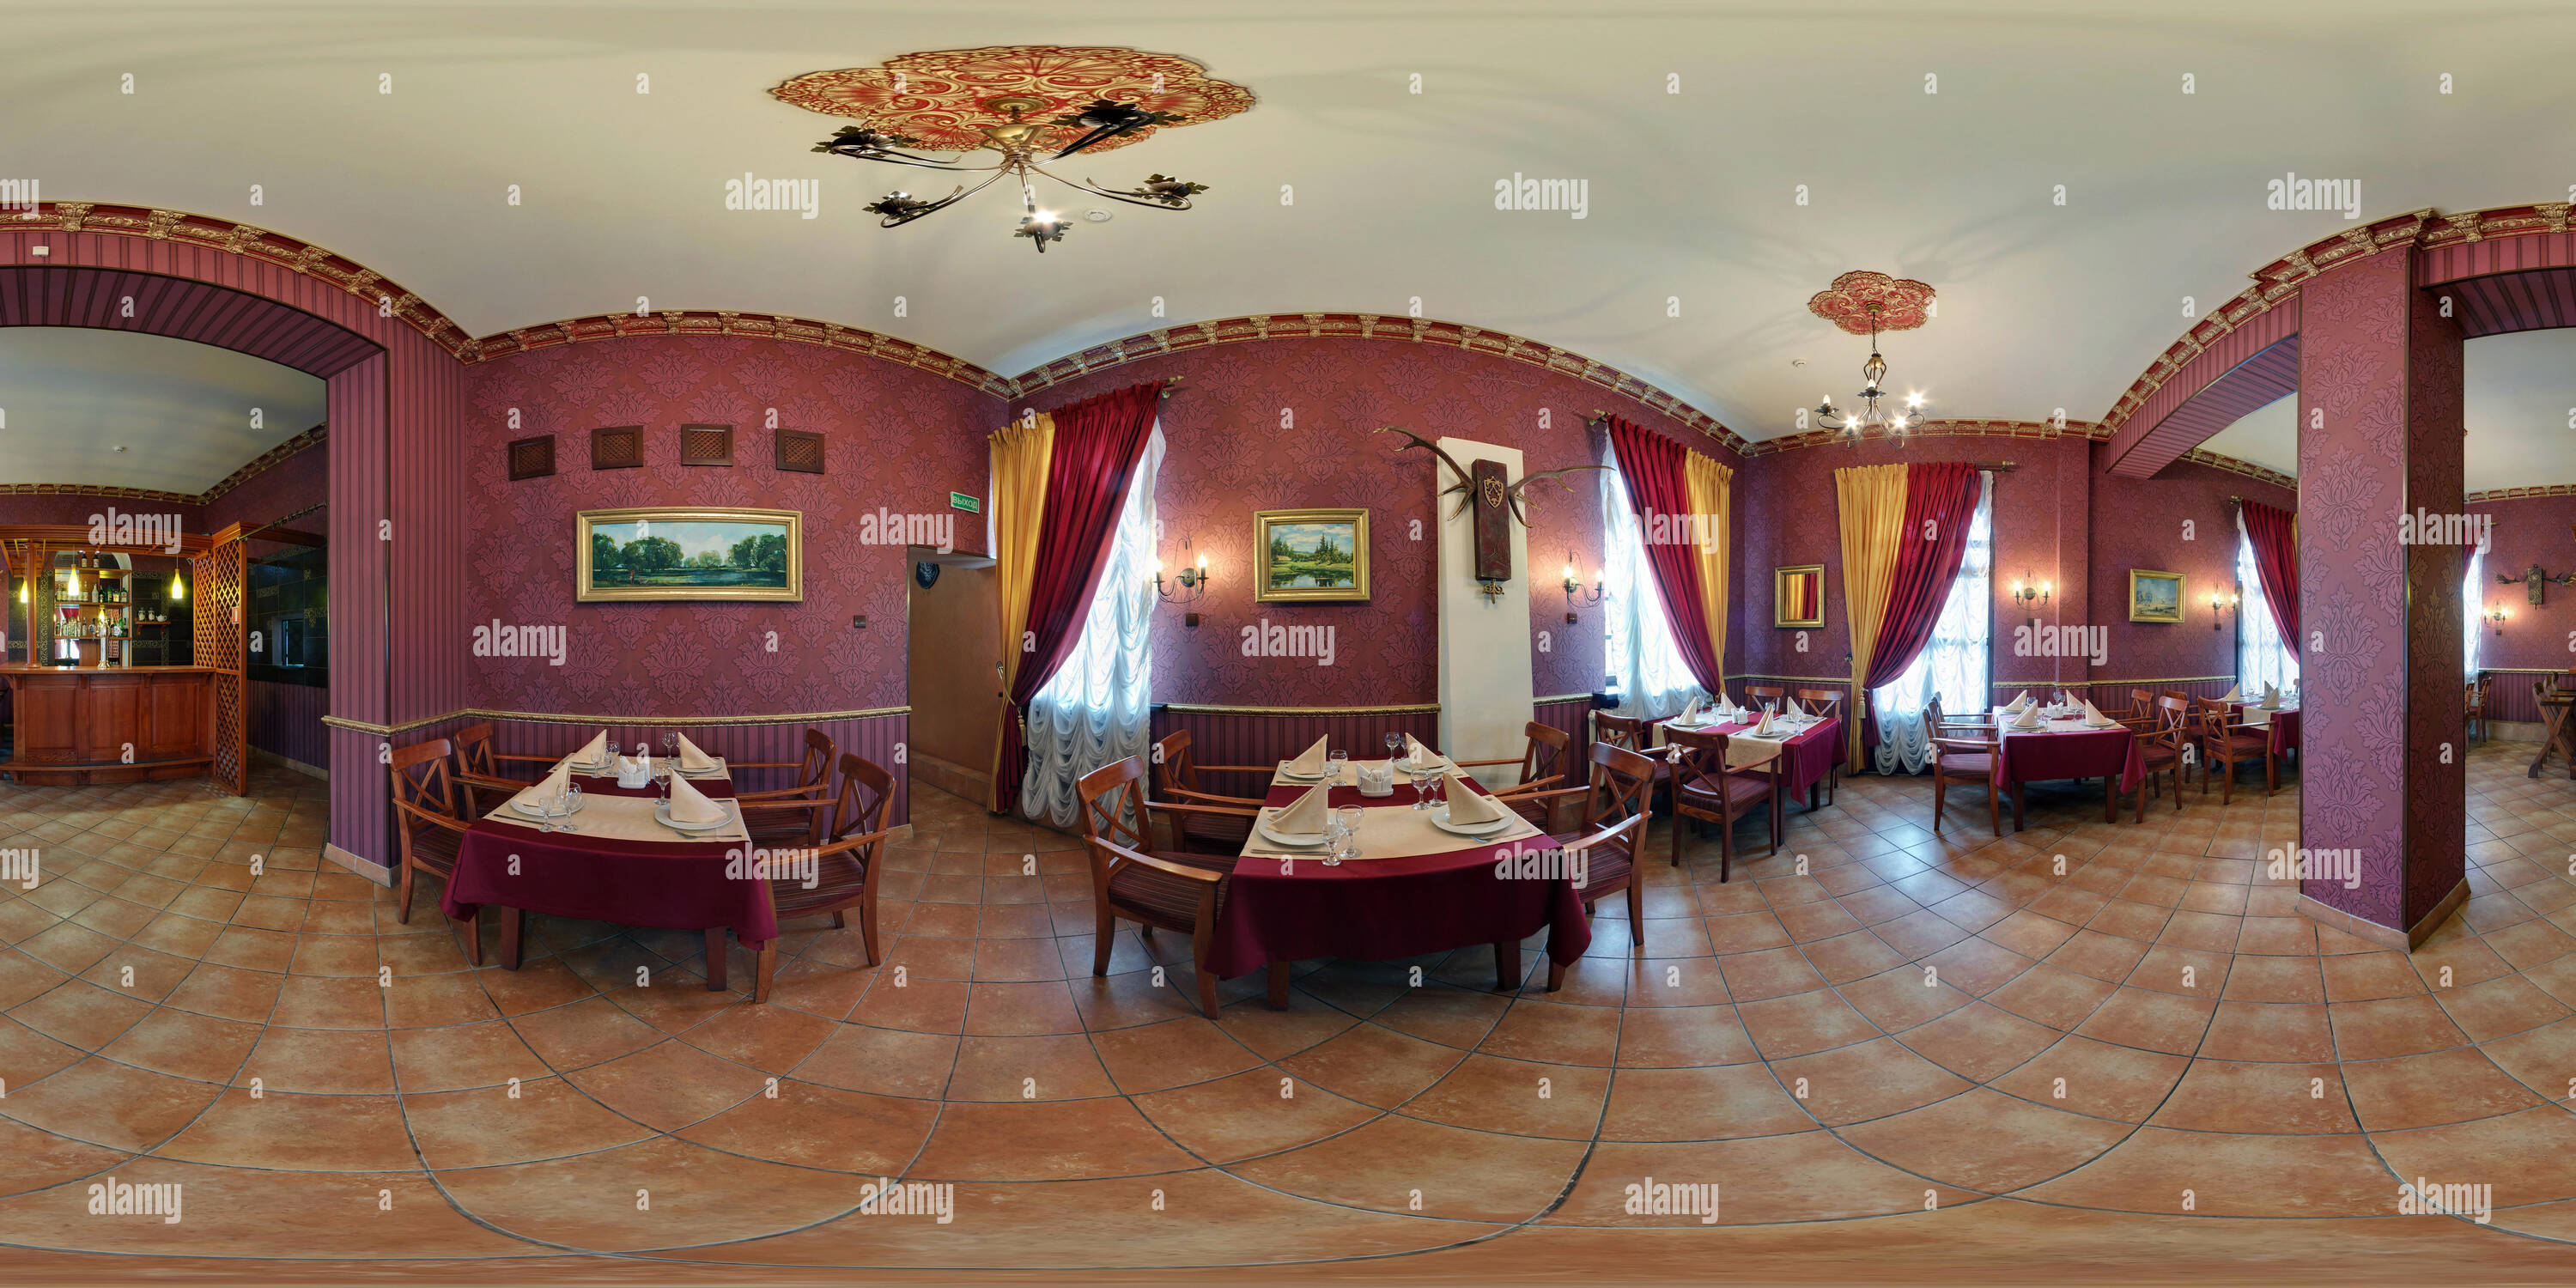 360 degree panoramic view of GRODNO , BELARUS - SEPTEMBER  11, 2011: 360 panorama view in interior of small stylish vintage cafe with red style, full 360 by 180 degrees angle pano